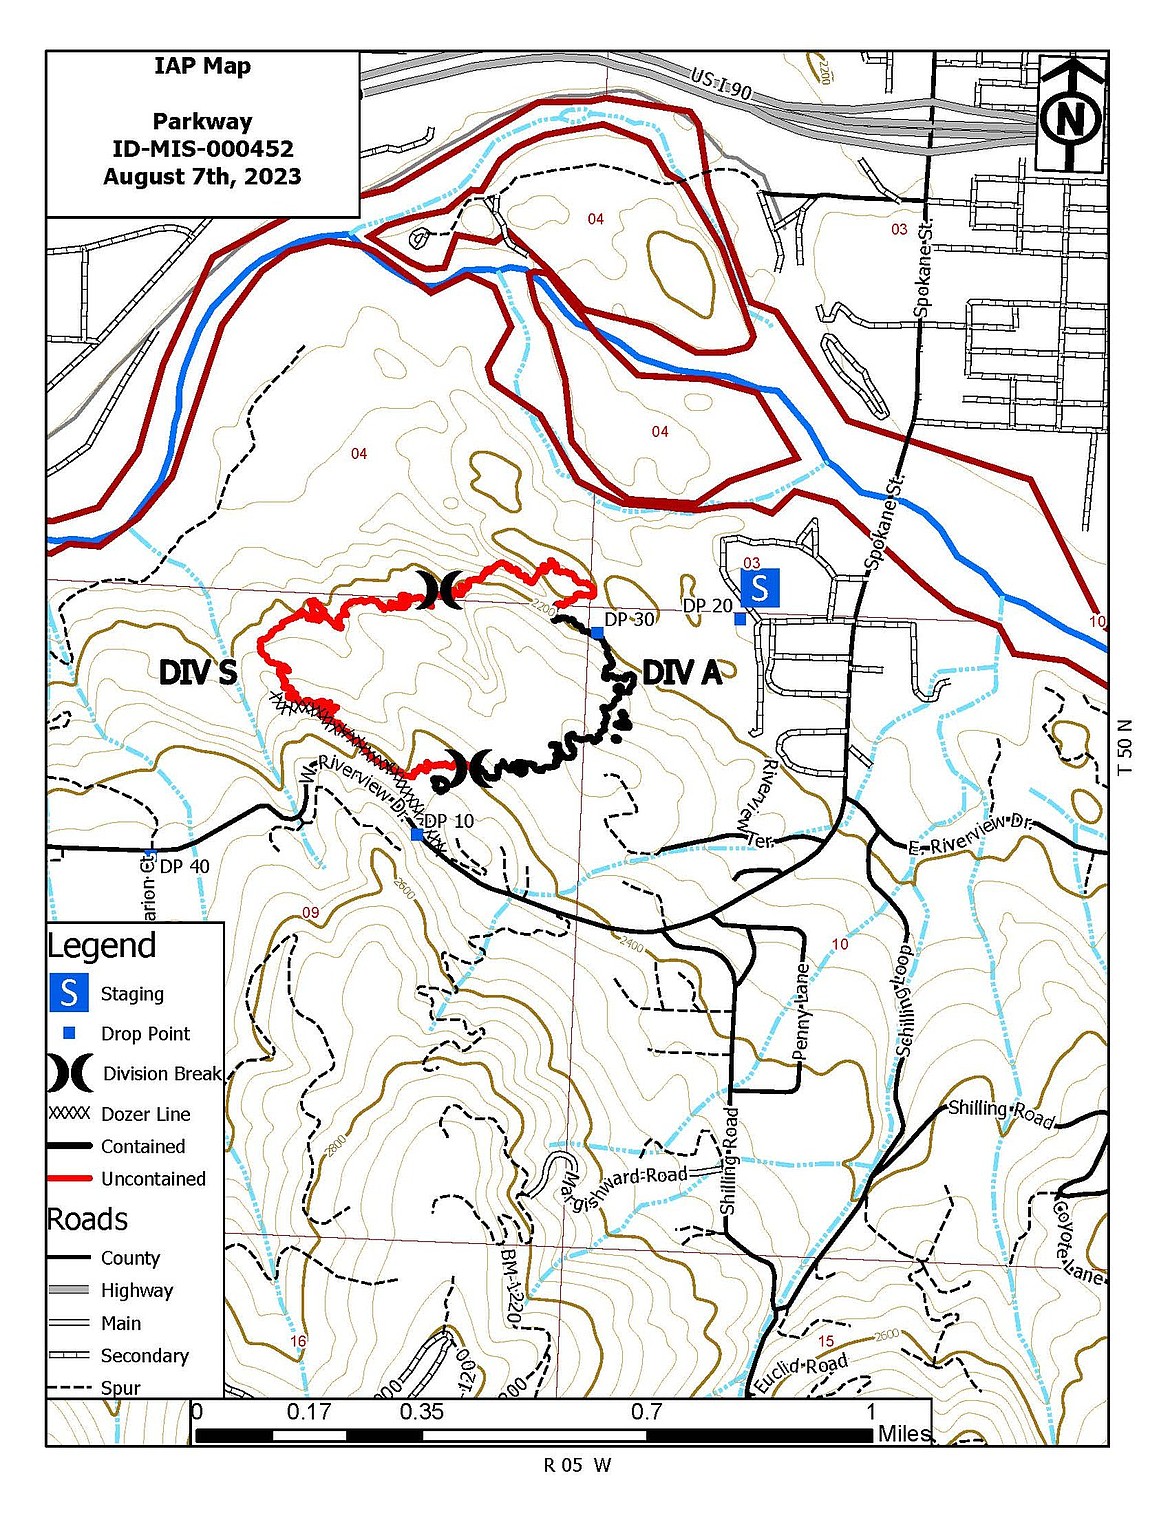 The map of the perimeter of the Parkway Fire as of 11 a.m. Monday.